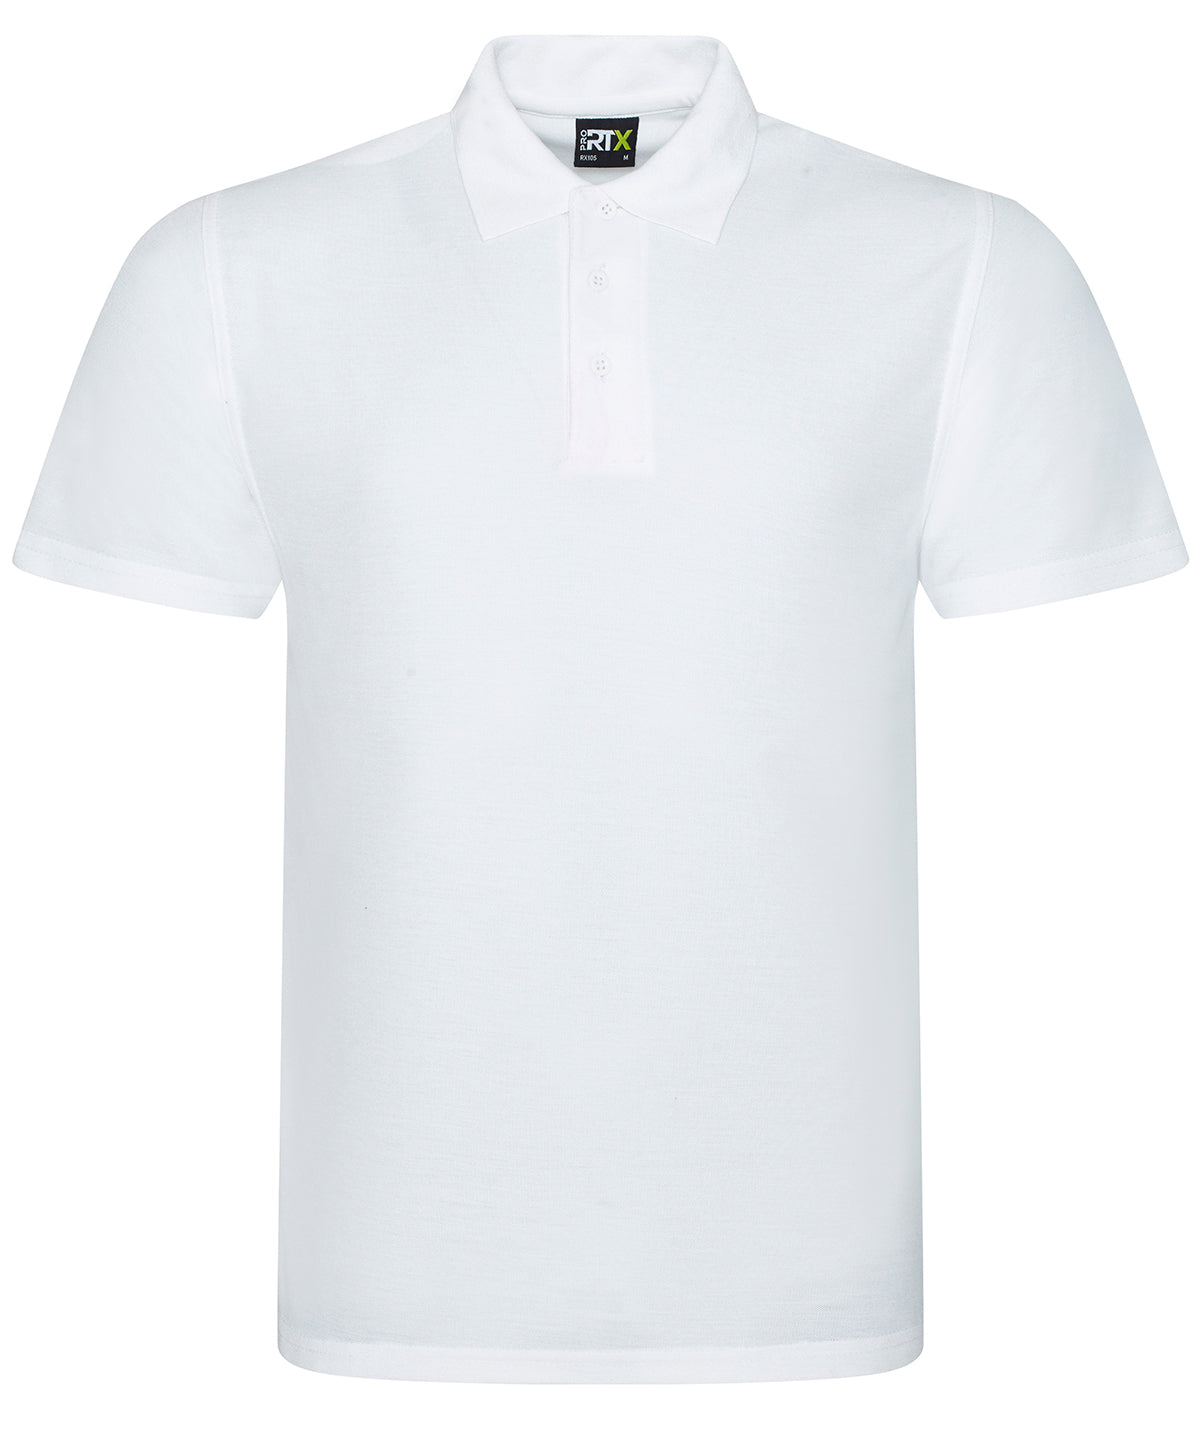 Personalised Polo Shirts - Bottle ProRTX Pro polyester polo